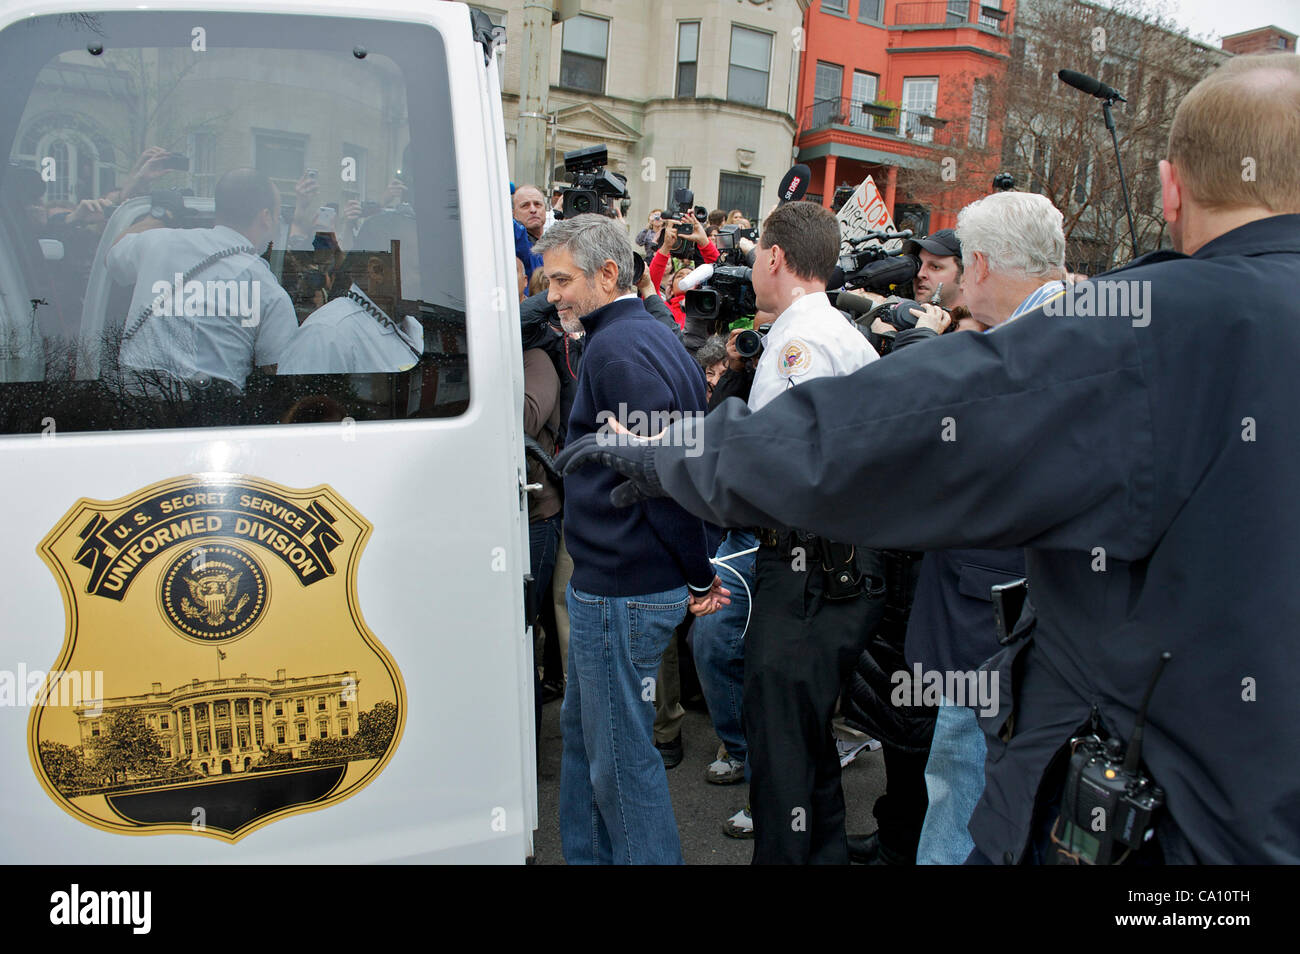 March 16, 2012 - Washington, District of Columbia, U.S. - Actor GEORGE CLOONEY is taken to a prisoner transport vehicle after he, his father Nick Clooney, members of Congress, human rights and faith leaders were arrested for protesting at the Embassy of Sudan. (Credit Image: © Mary F. Calvert/ZUMAPR Stock Photo